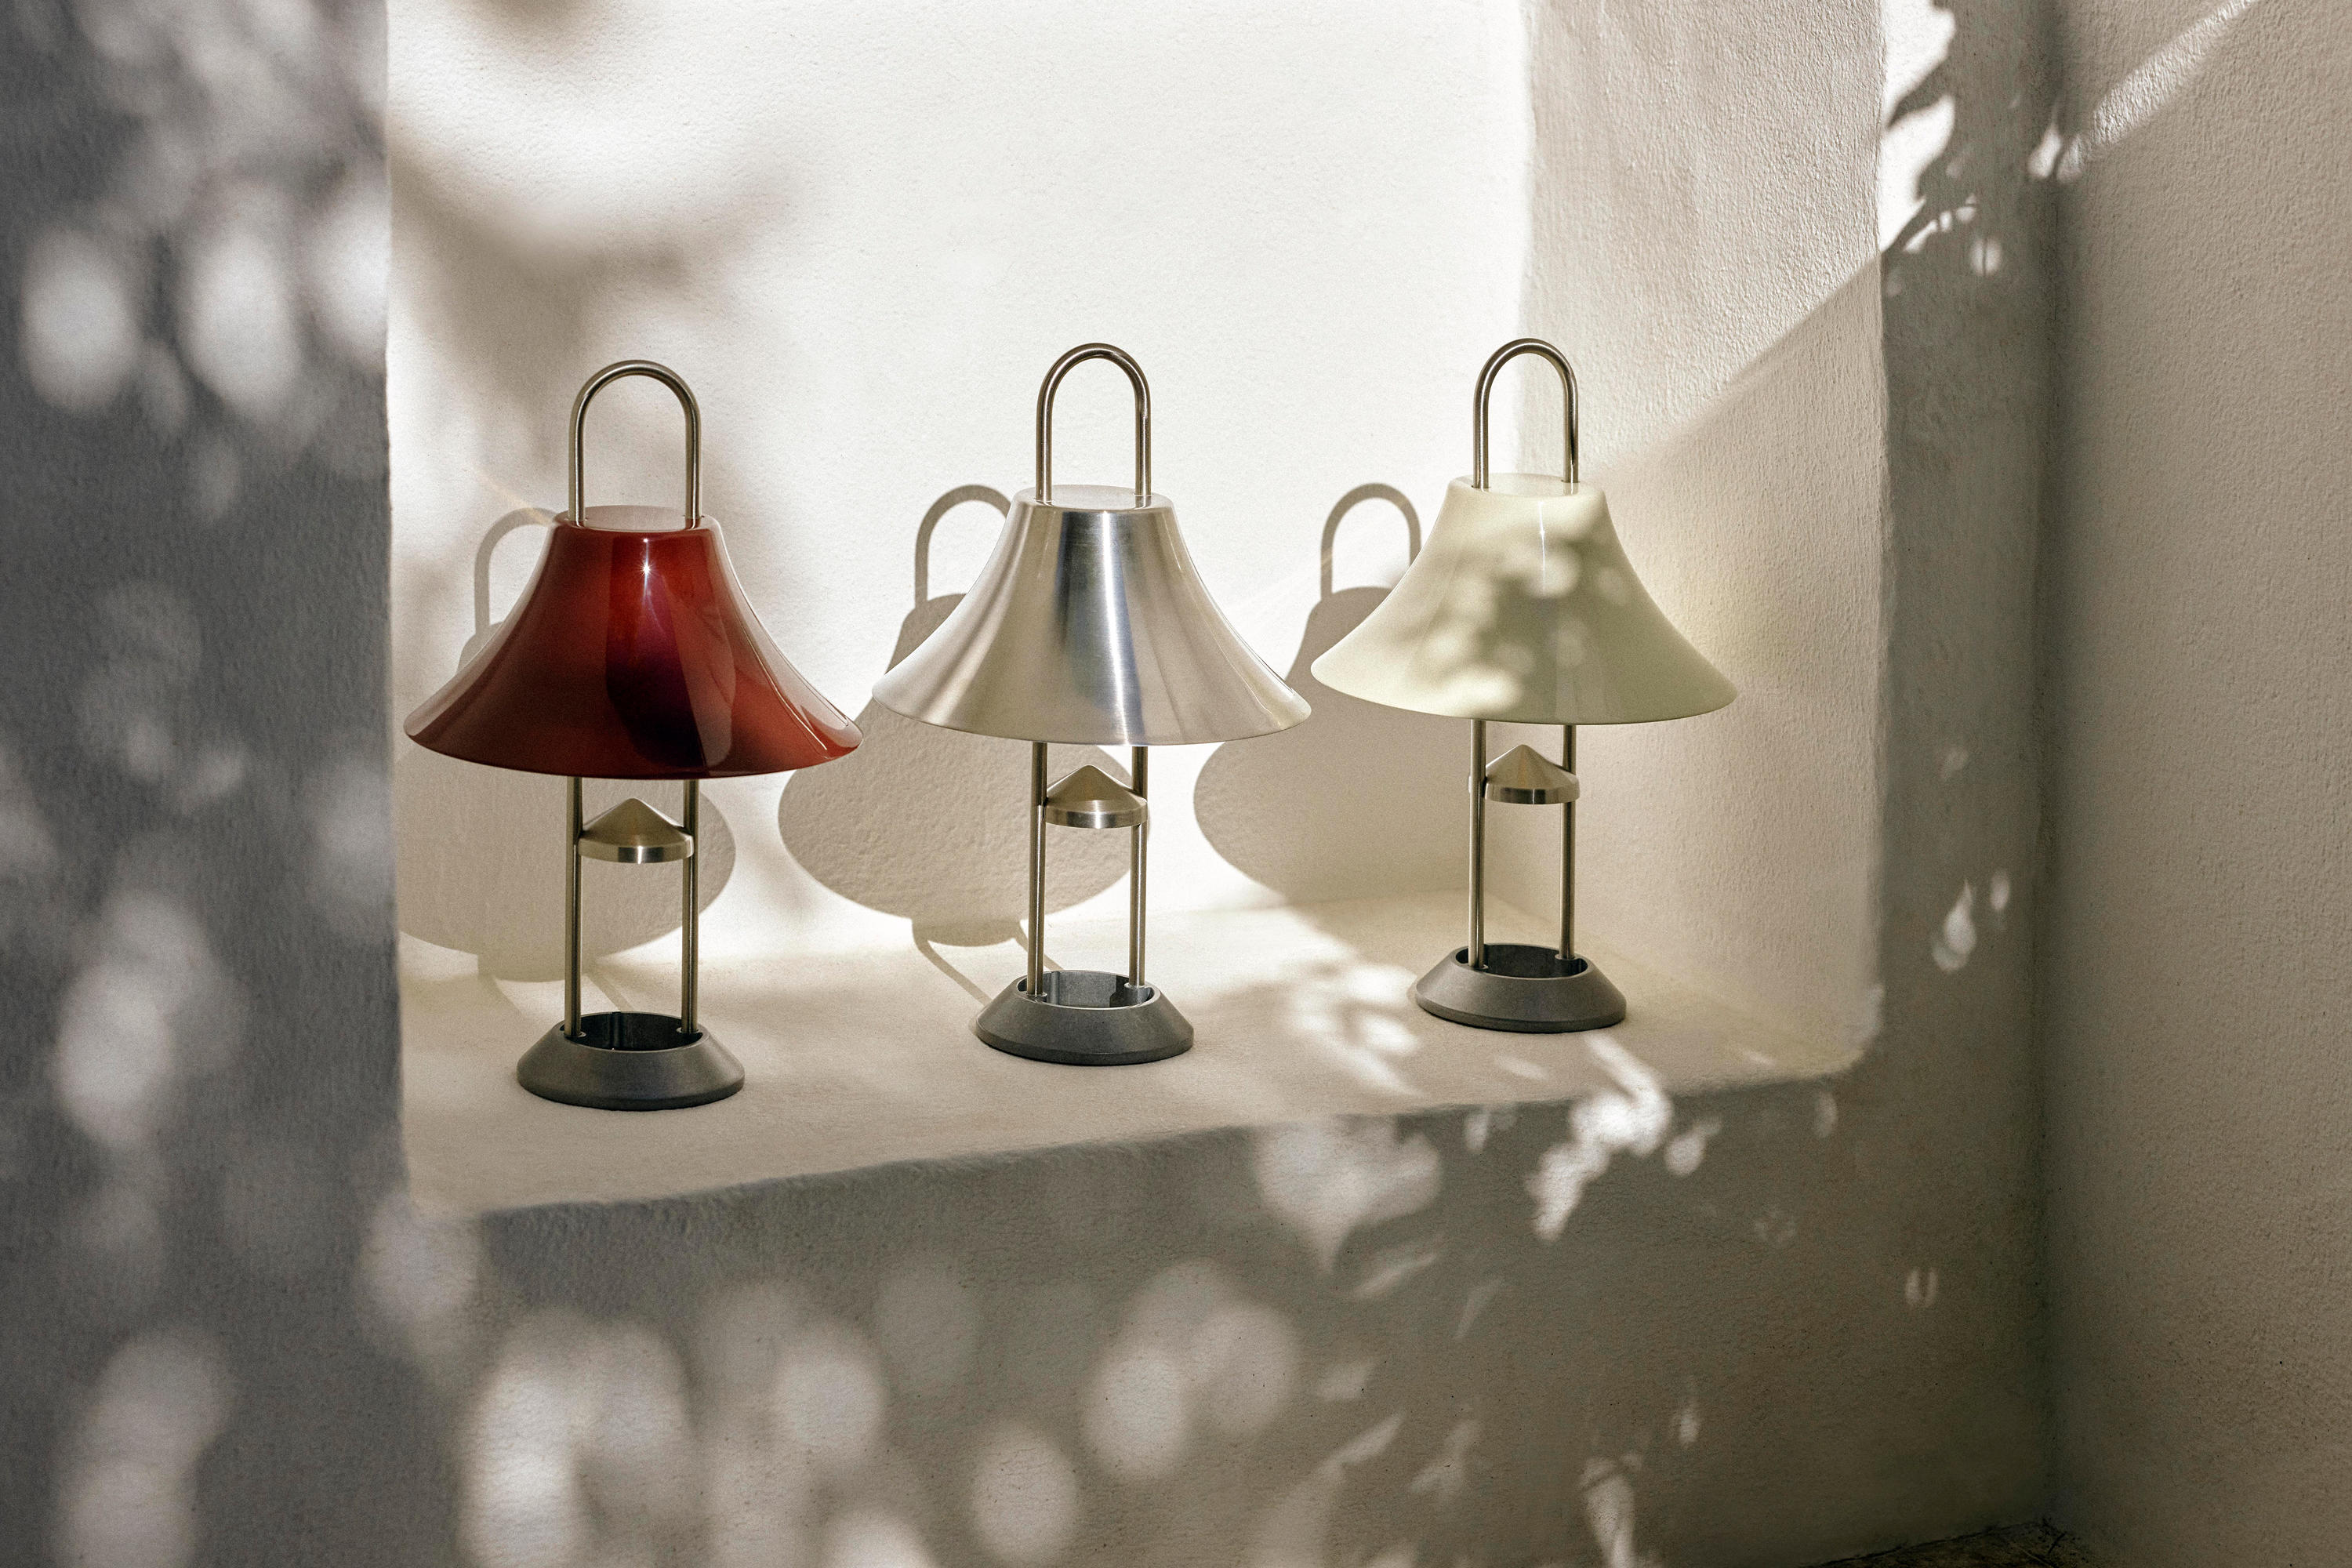 https://image.architonic.com/pfm3-3/20708458/mousqueton--mousqueton-lamp-iron-red-brushed-stainless-steel-oyster-white-fam-g-arcit18.jpg